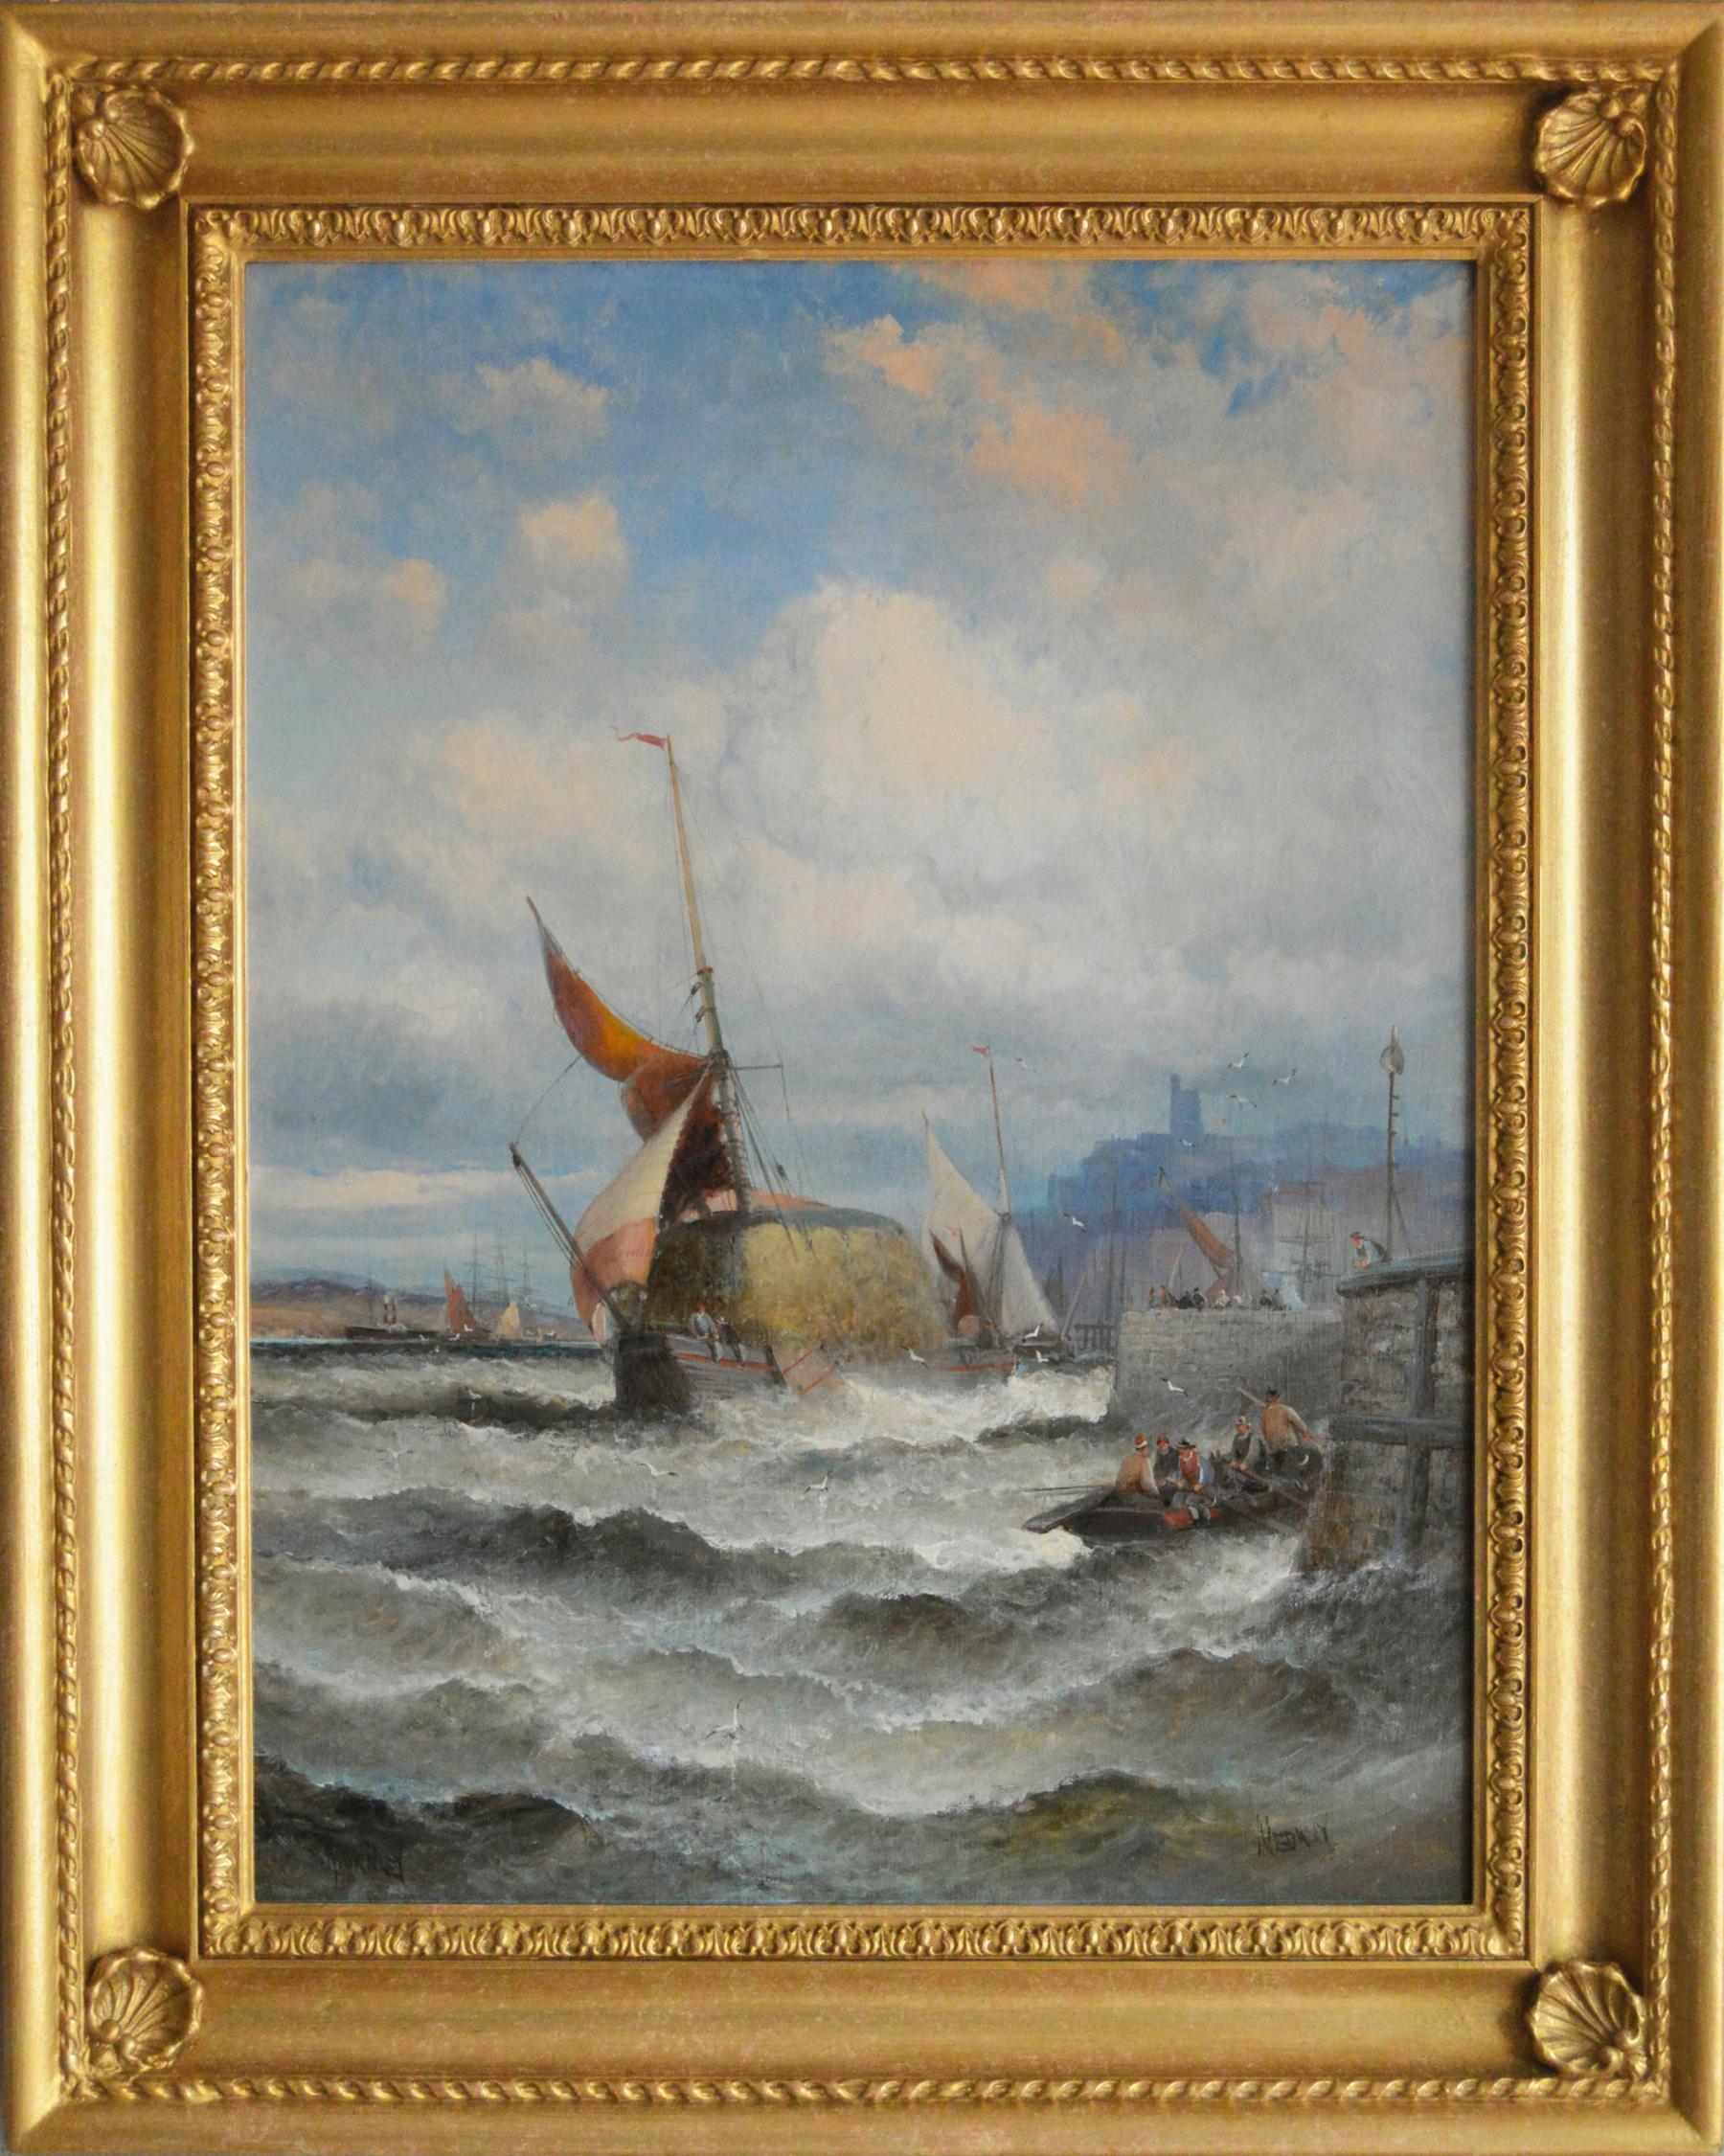 Hubert Thornley Landscape Painting - 19th Century seascape oil painting of a hay barge on the Medway